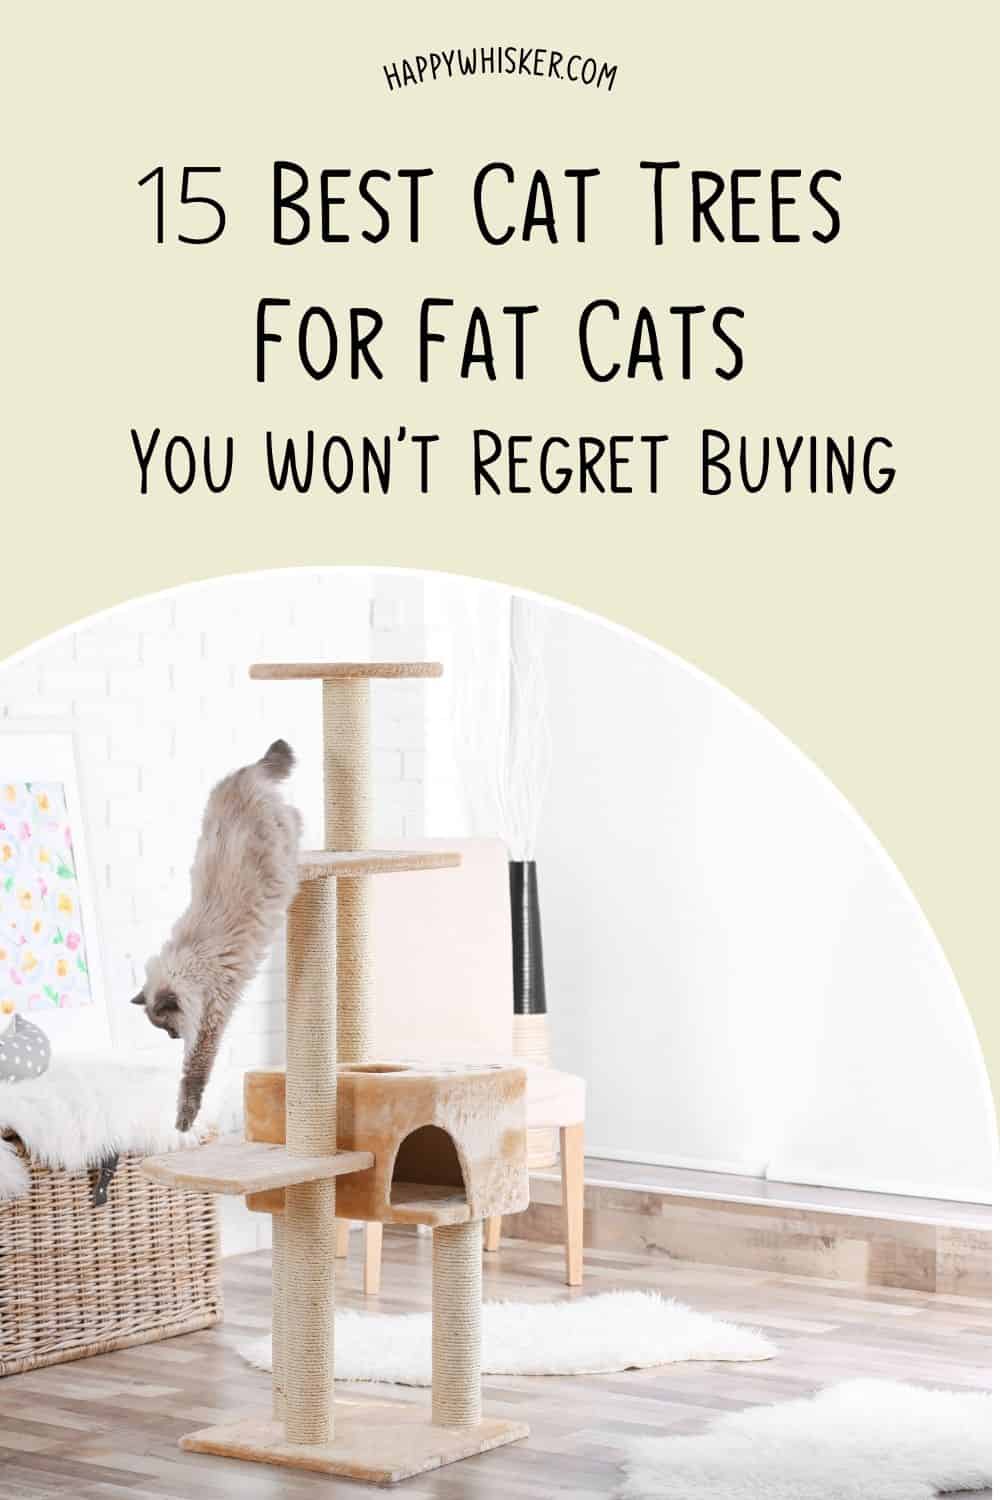 15 Best Cat Trees For Fat Cats You Won’t Regret Buying Pinterest